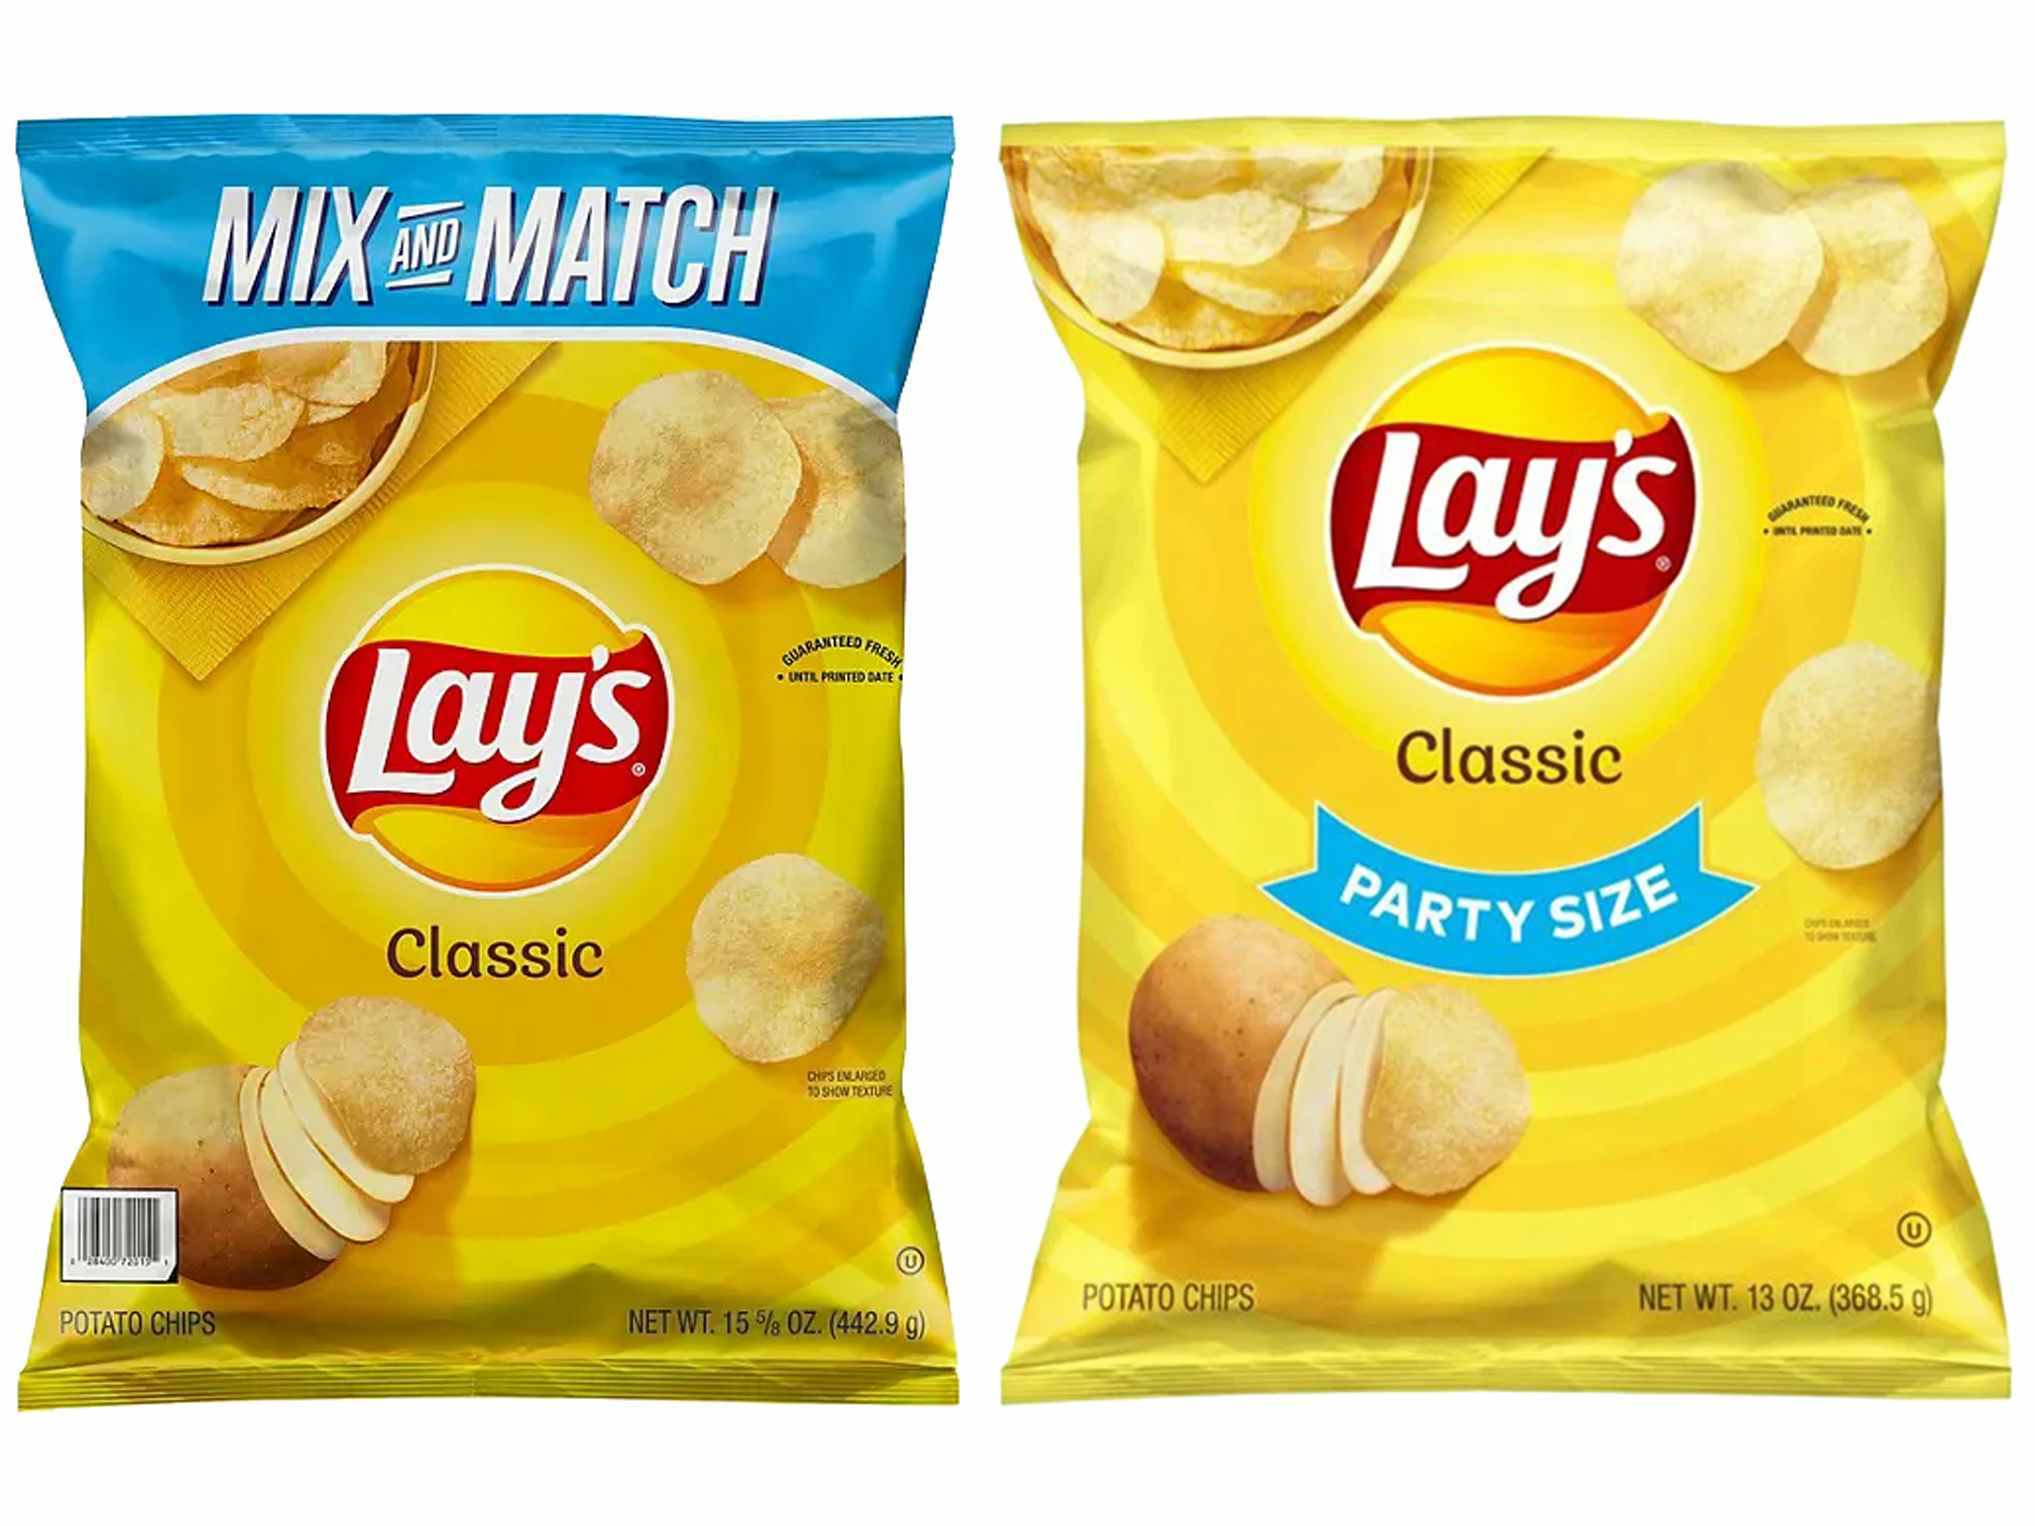 lays classic and mix and match potato chip bags side by side